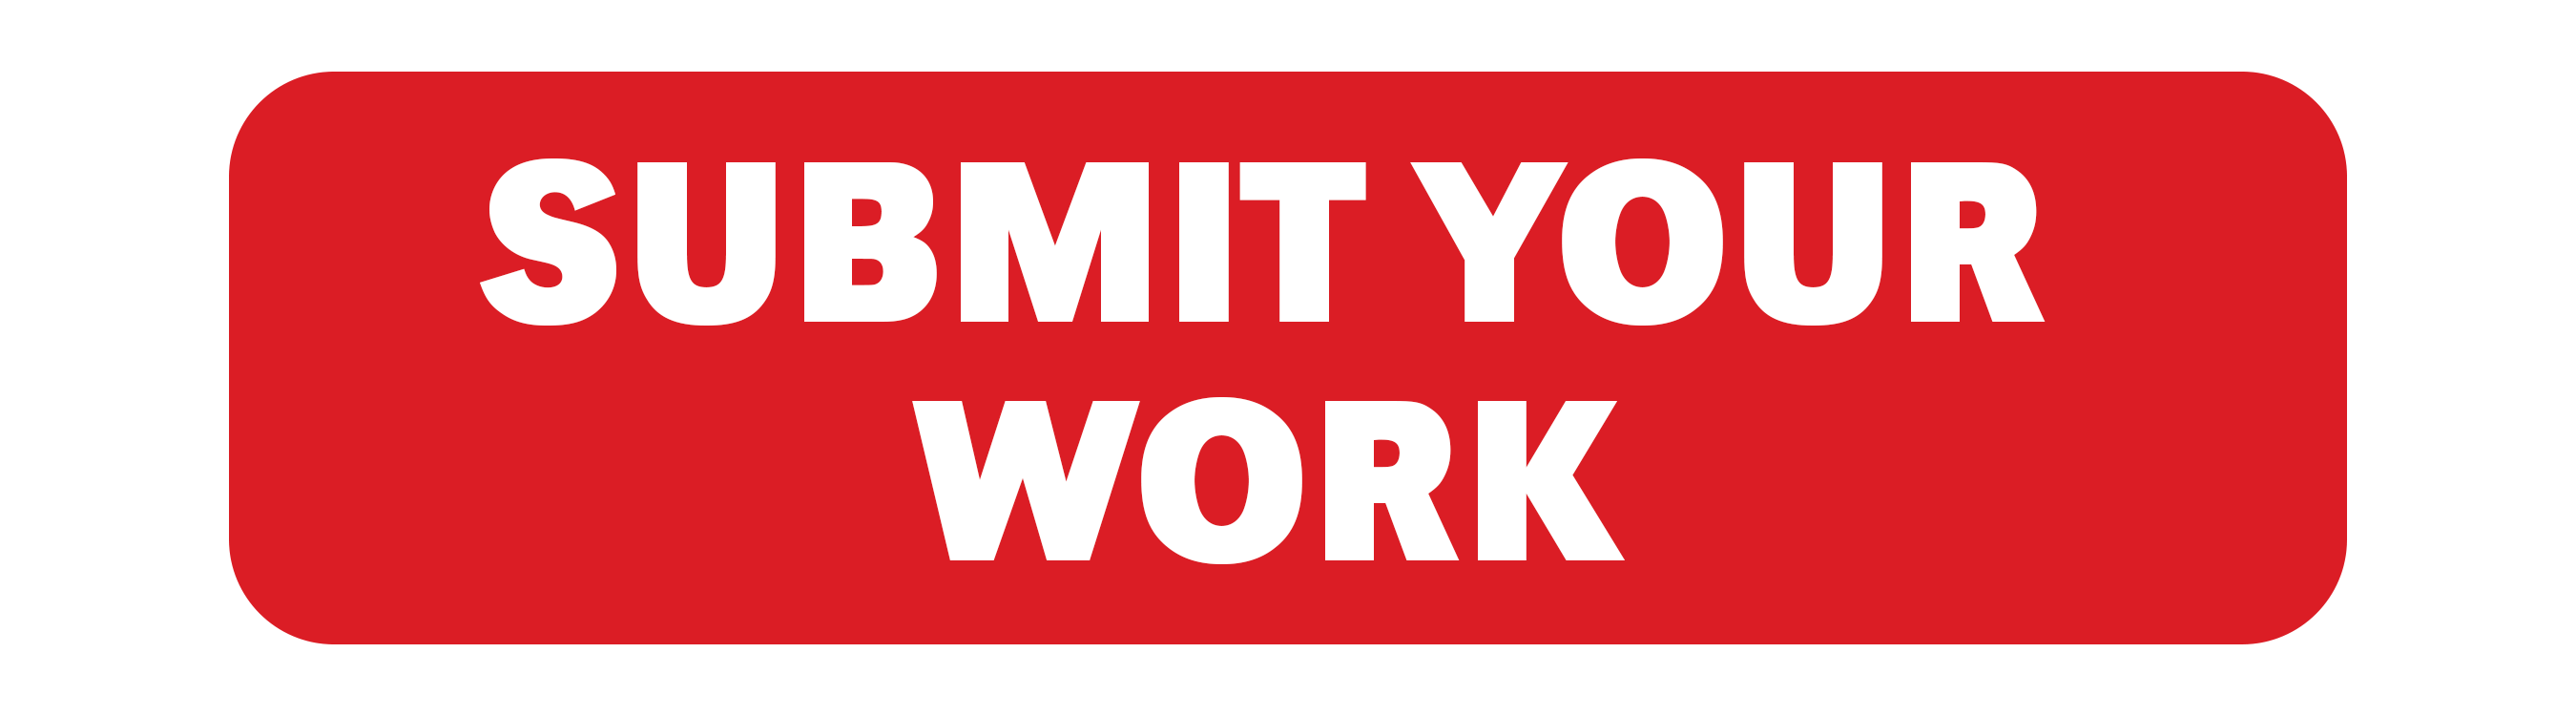 submit your work button